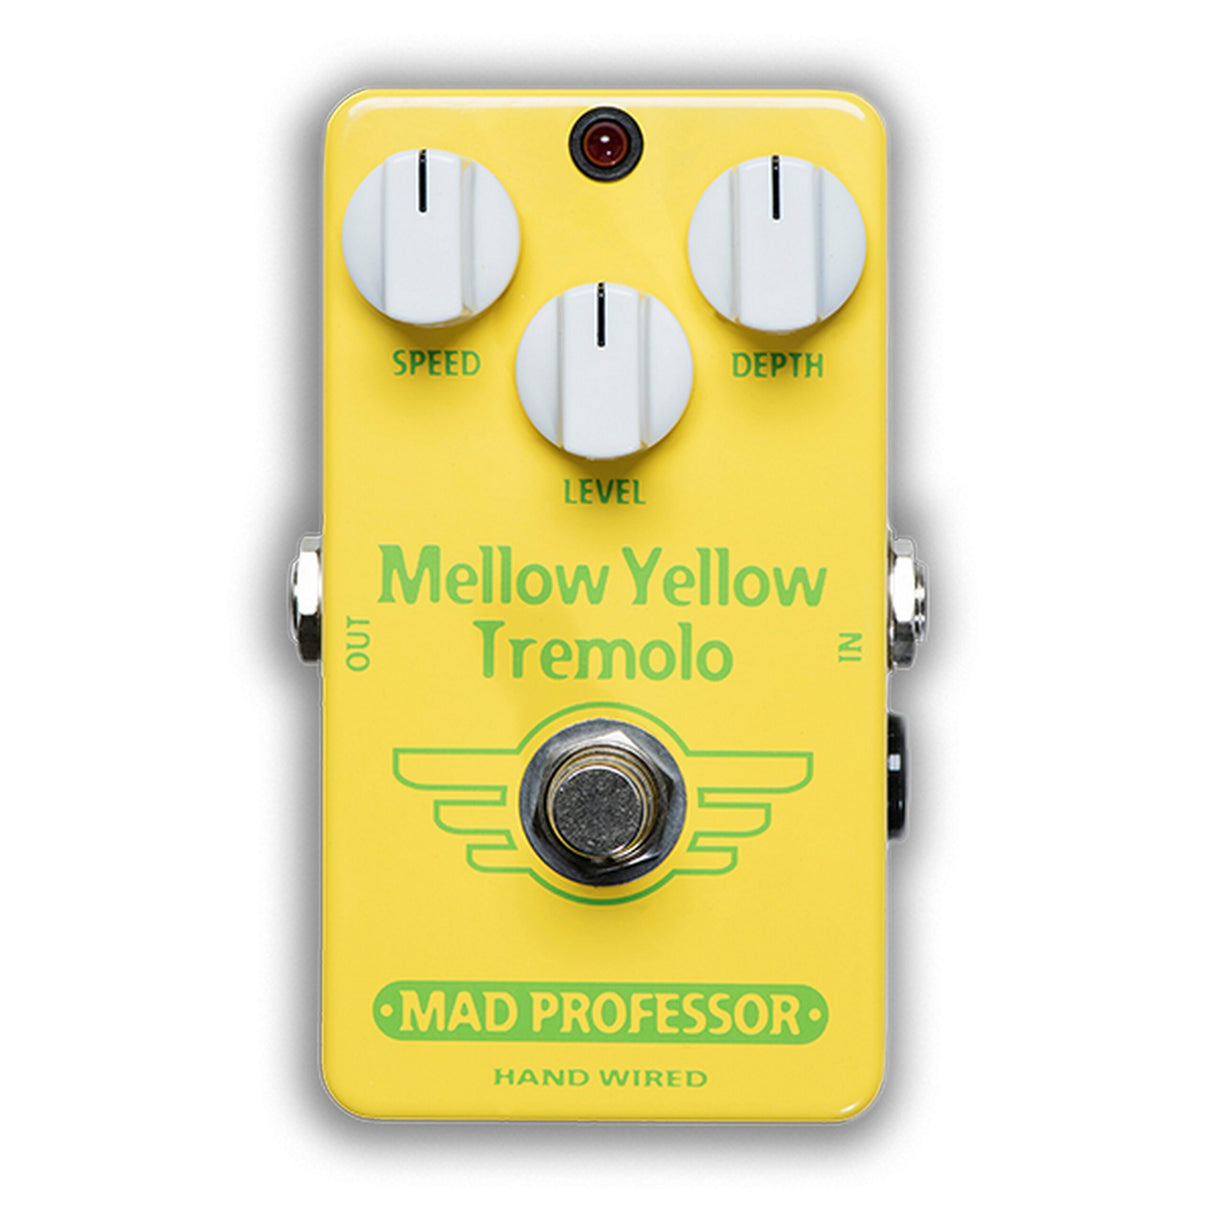 Mad Professor Mellow Yellow Tremolo Hand Wired Effect Pedal